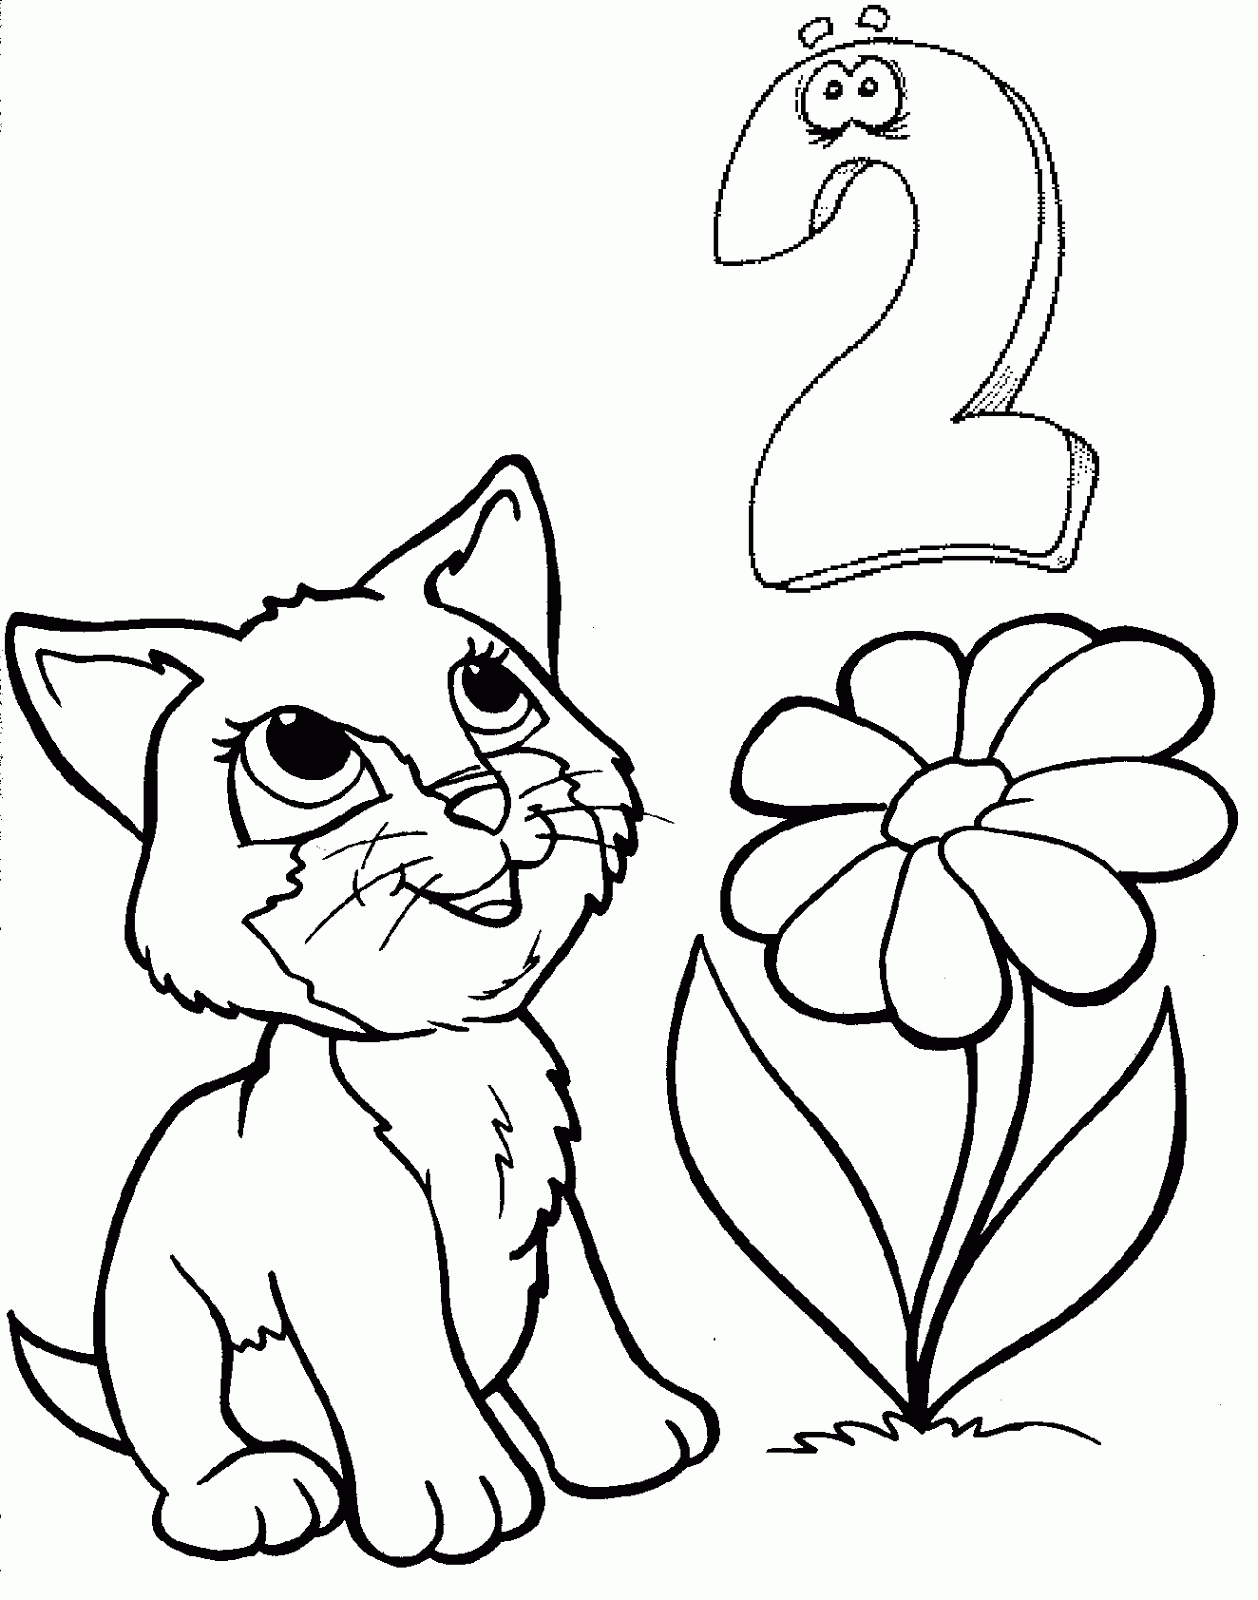 Coloring page: Numbers (Educational) #125354 - Free Printable Coloring Pages